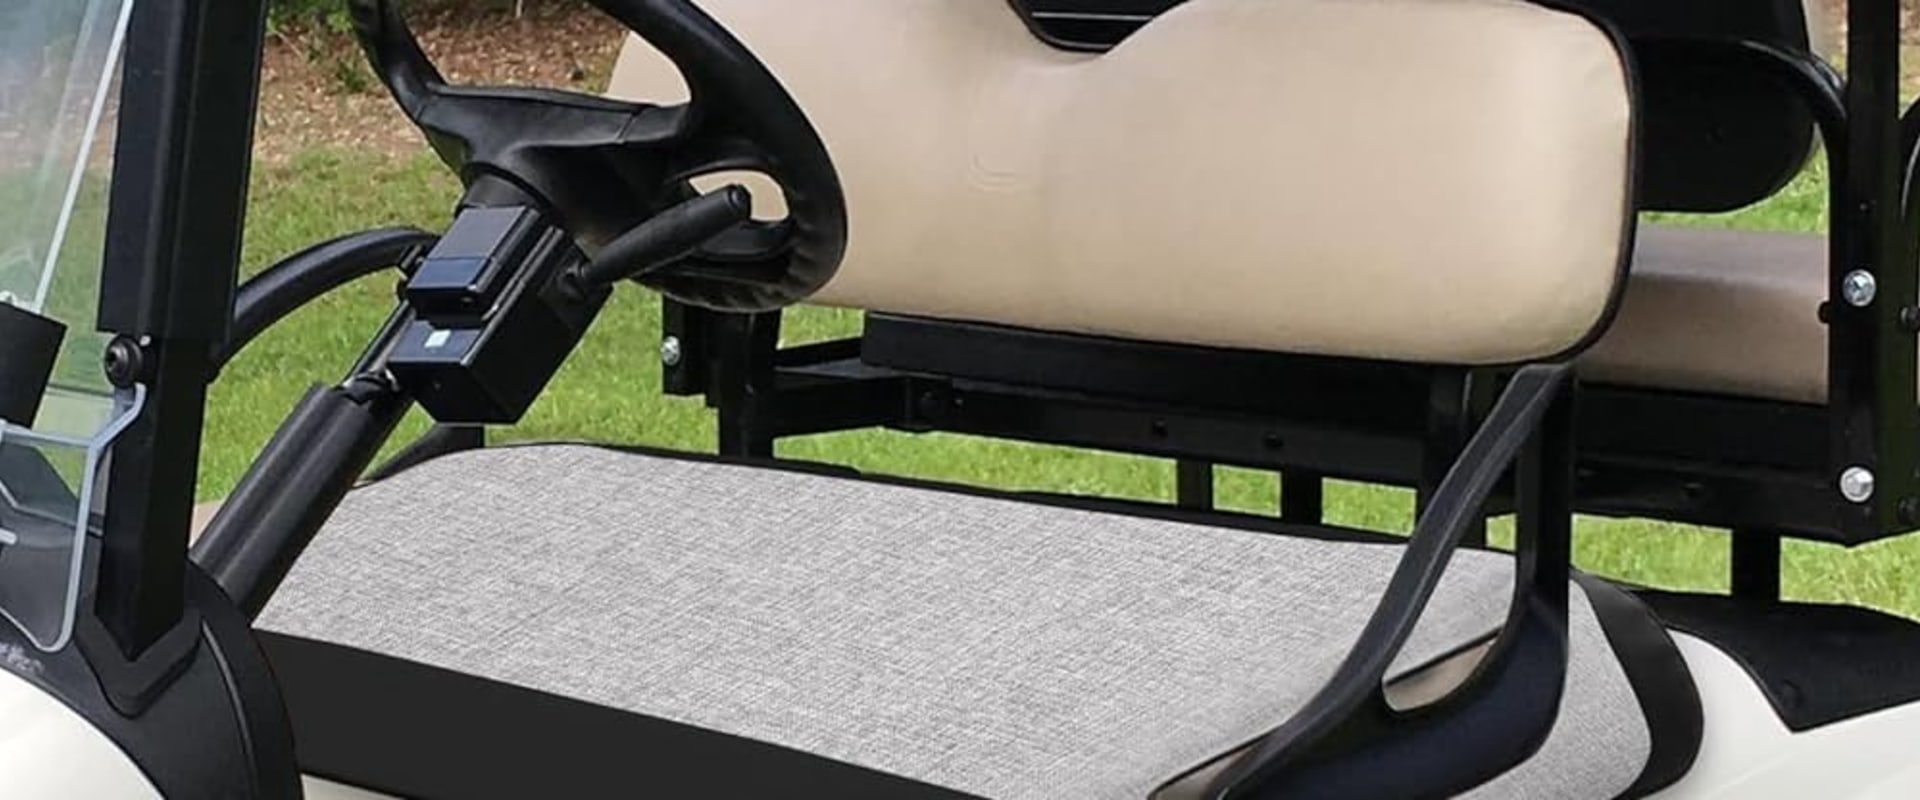 How to Choose the Best Golf Cart Seat Covers for Added Comfort and Style